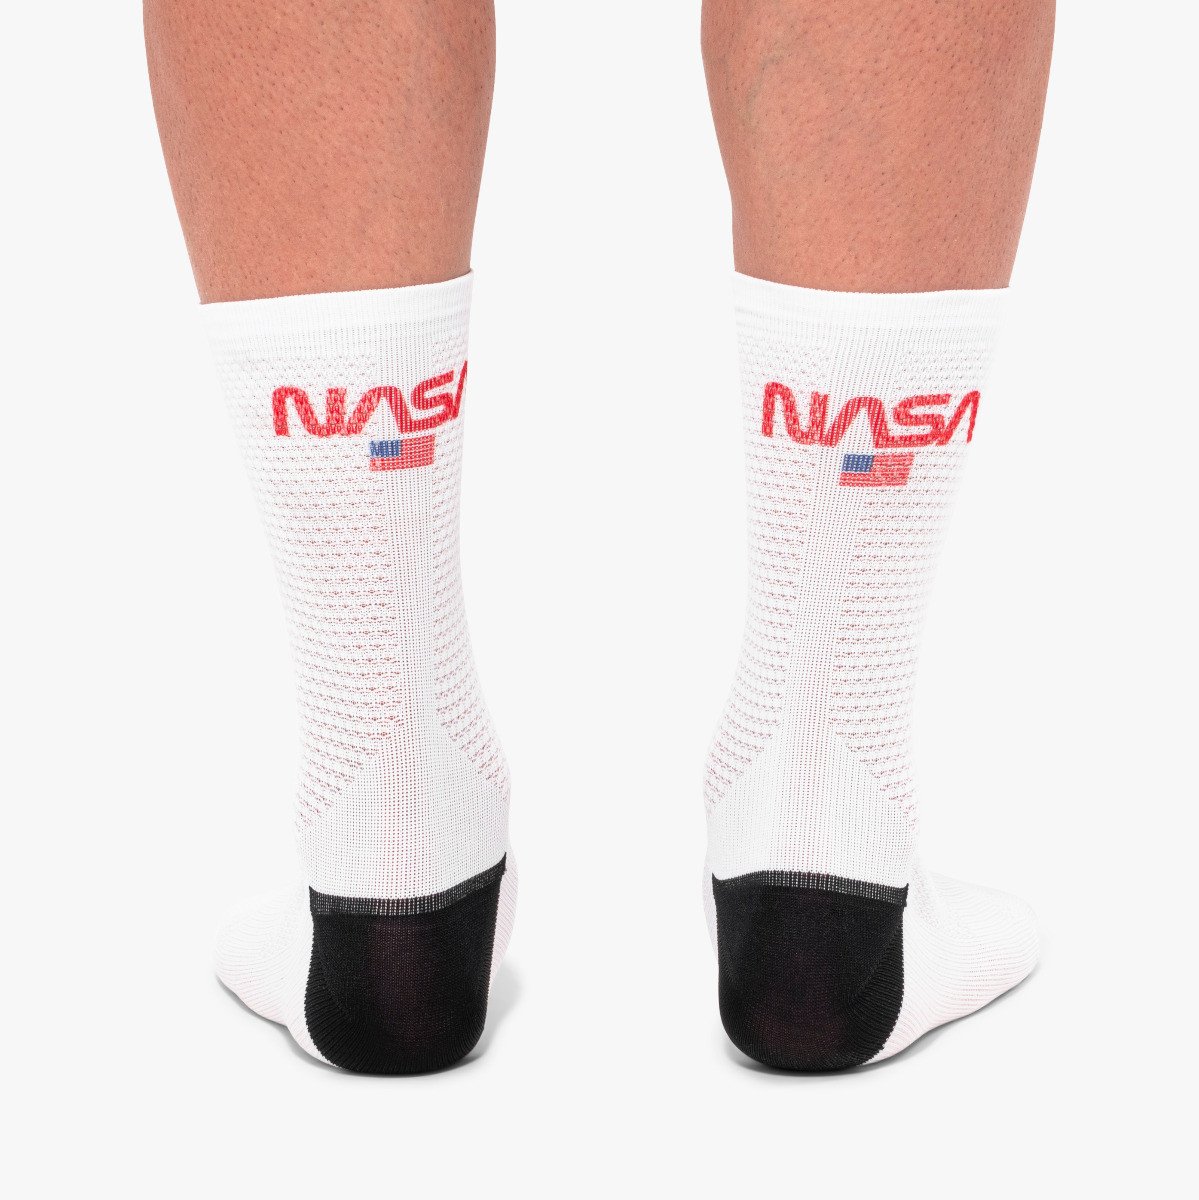 SCICON X SPACE AGENCY CYCLING SOCKS 04